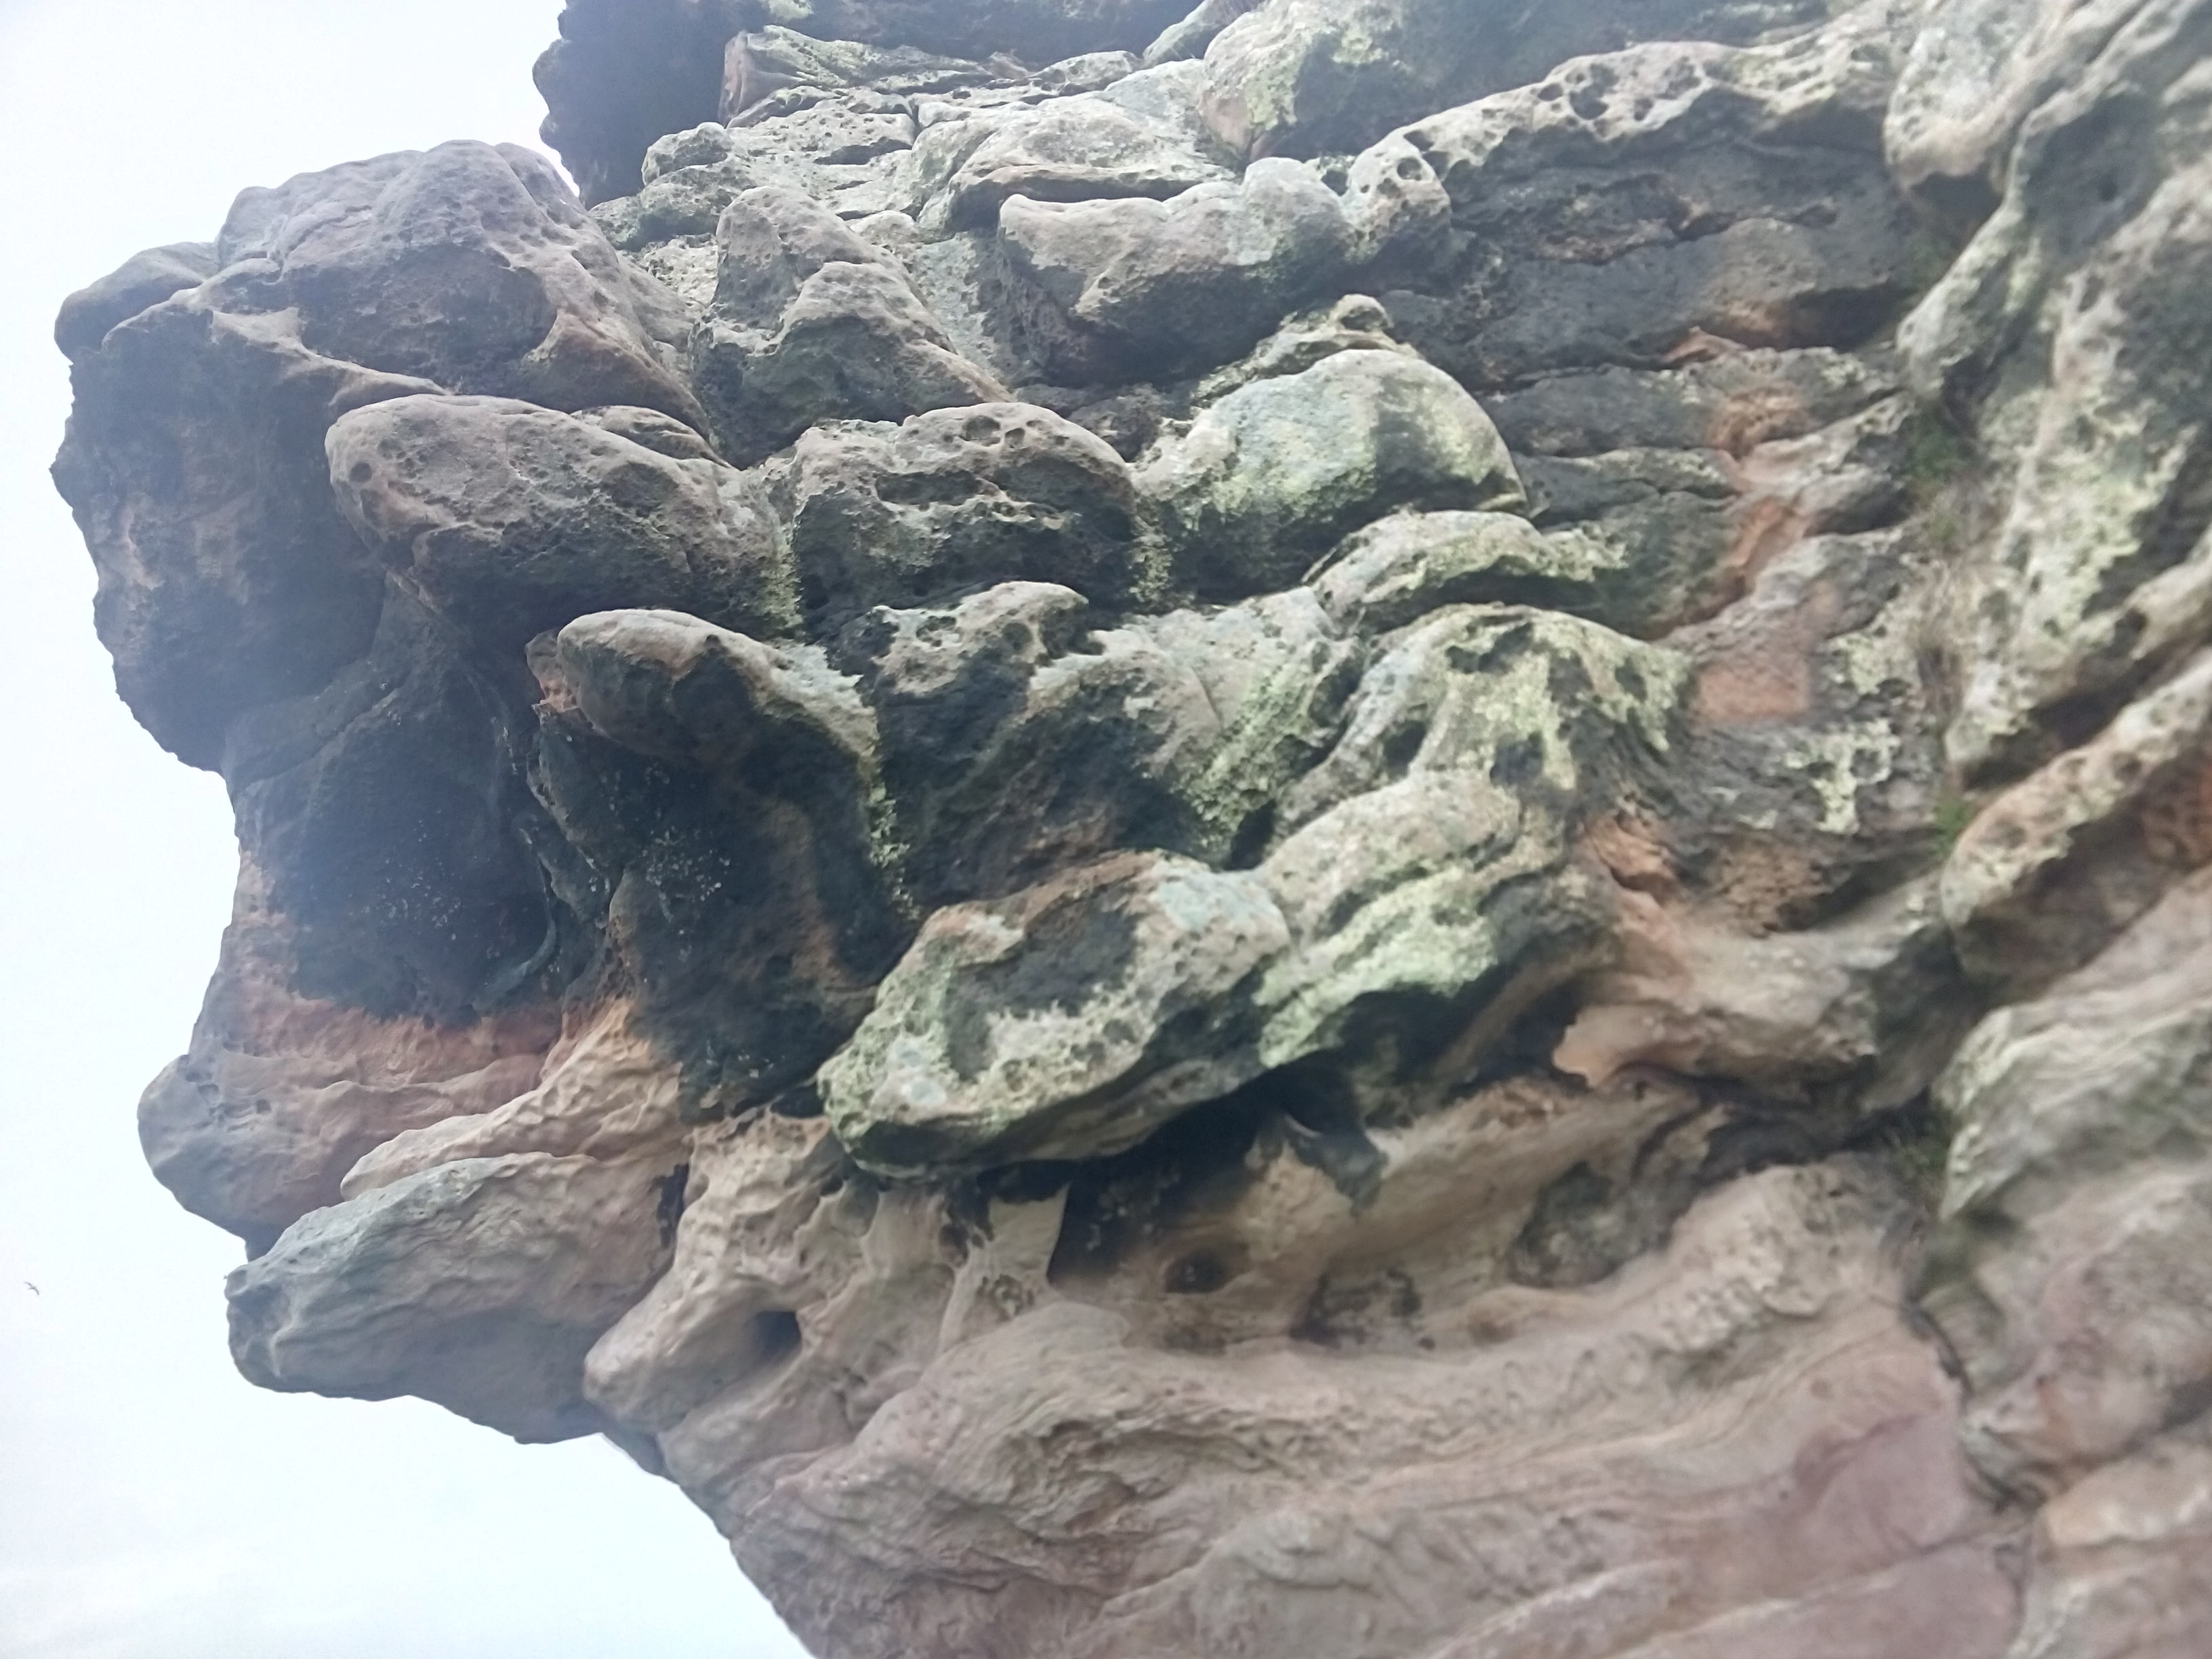 A close up of gnarly twisted rock face